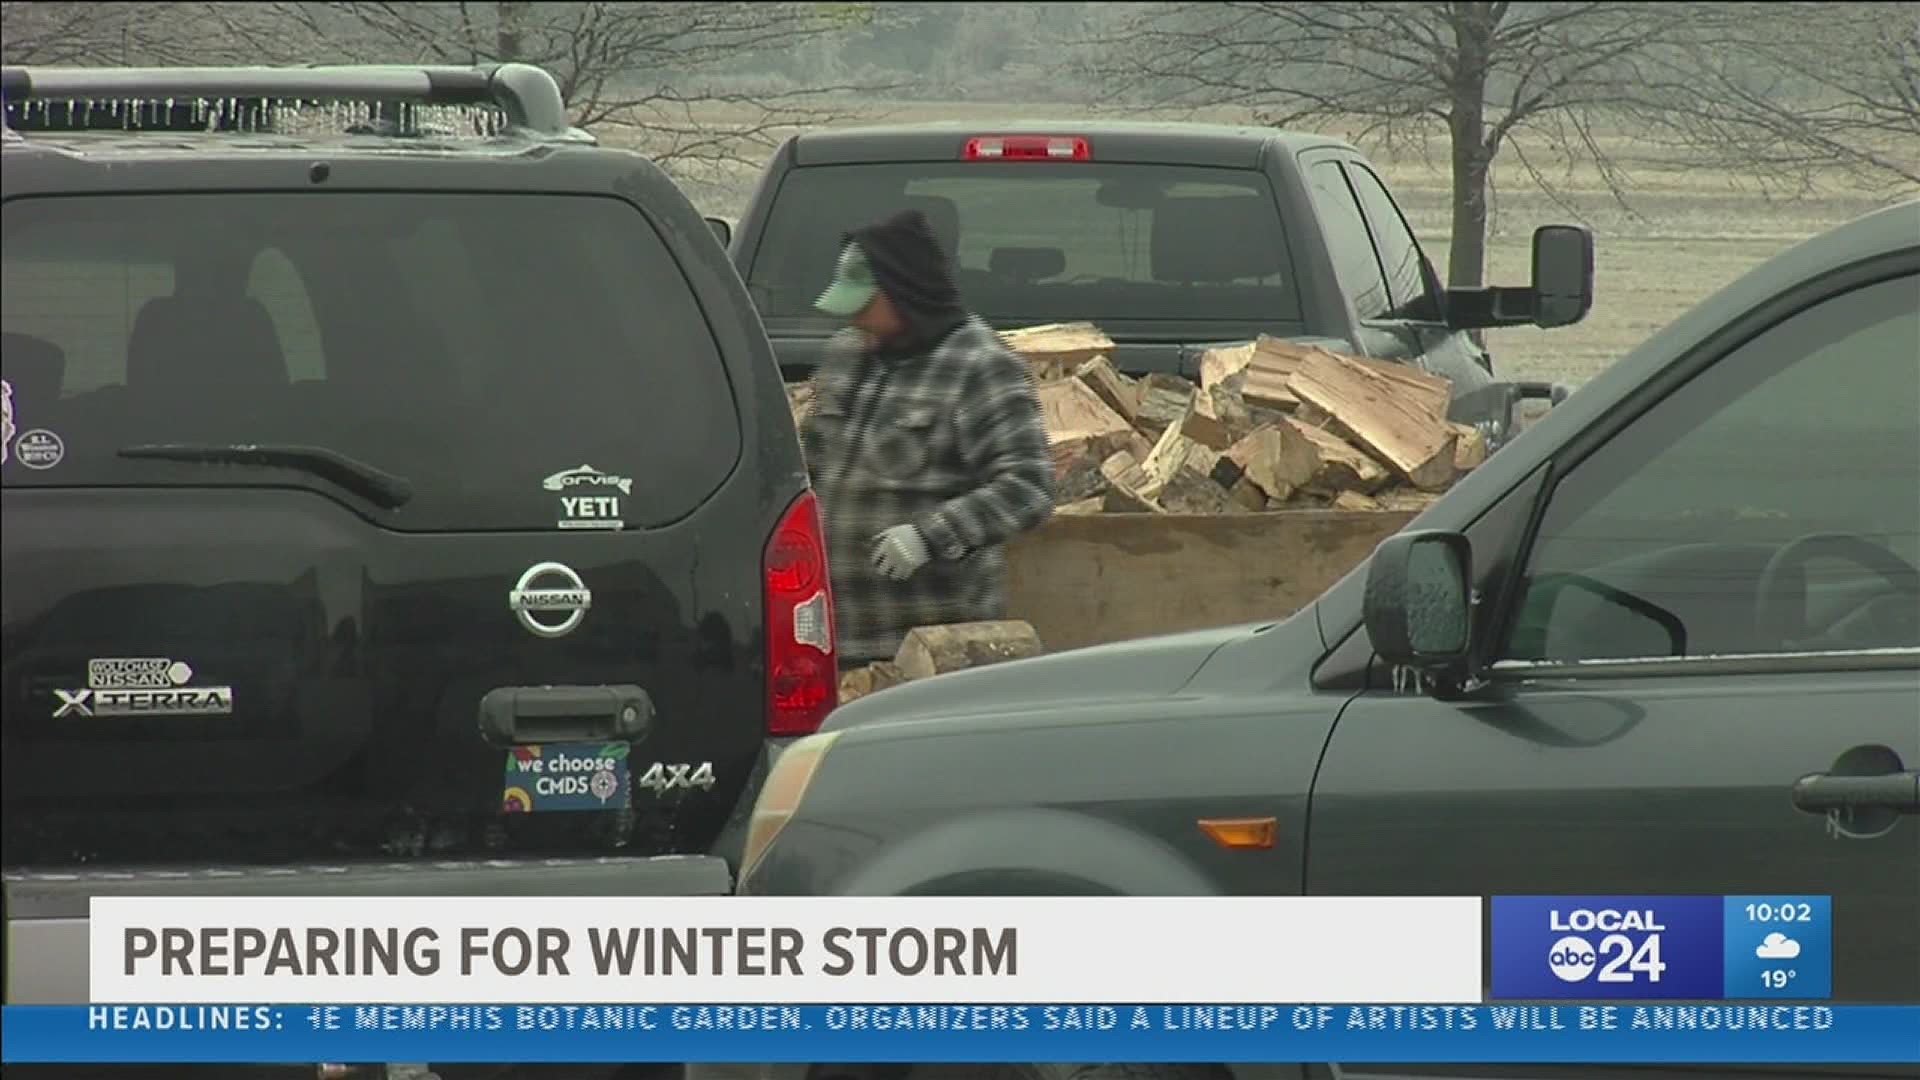 People are making sure they have enough supplies for the next several days; as several inches of snow are forecast along with more frigid temperatures